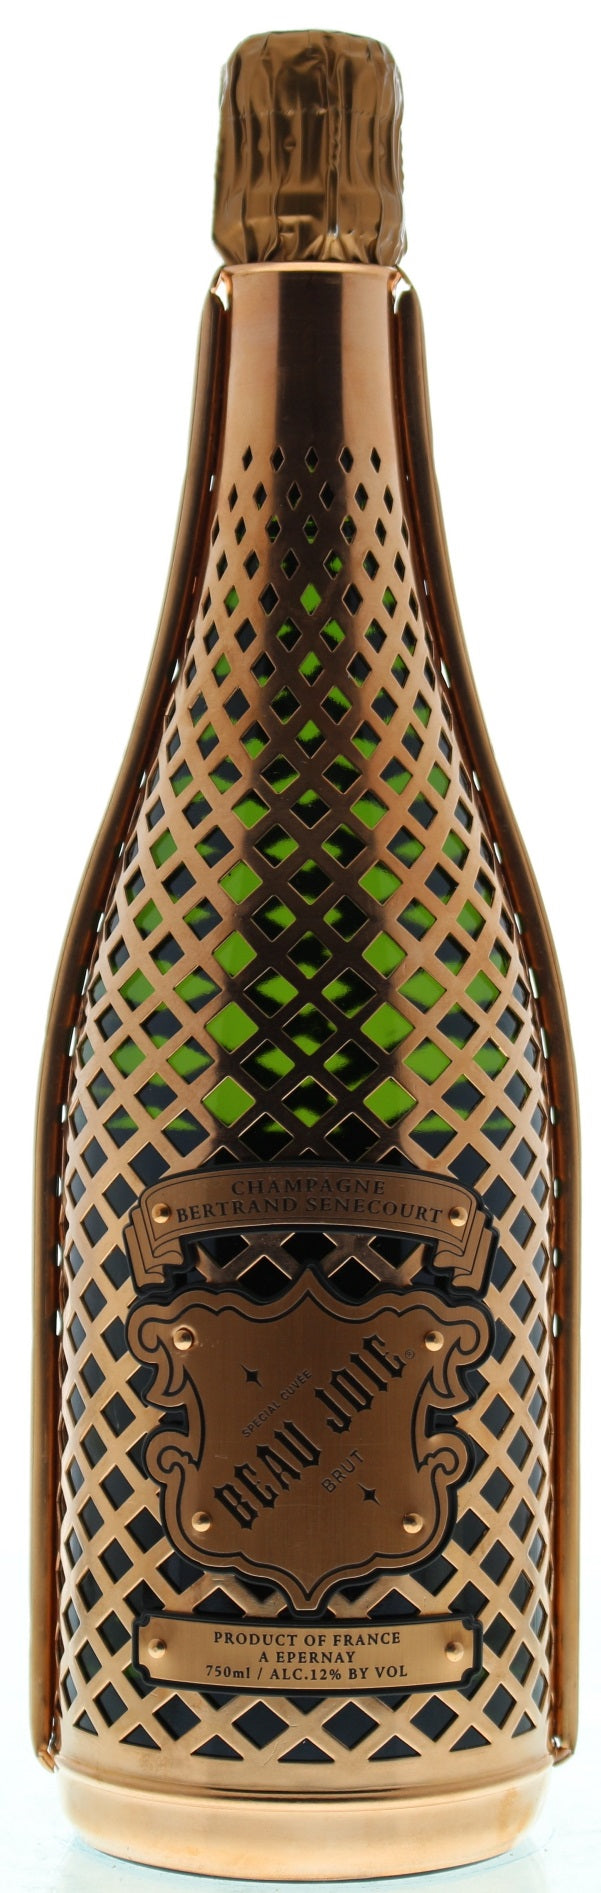 Beau Joie Champagne Brut Special Cuvee Squire